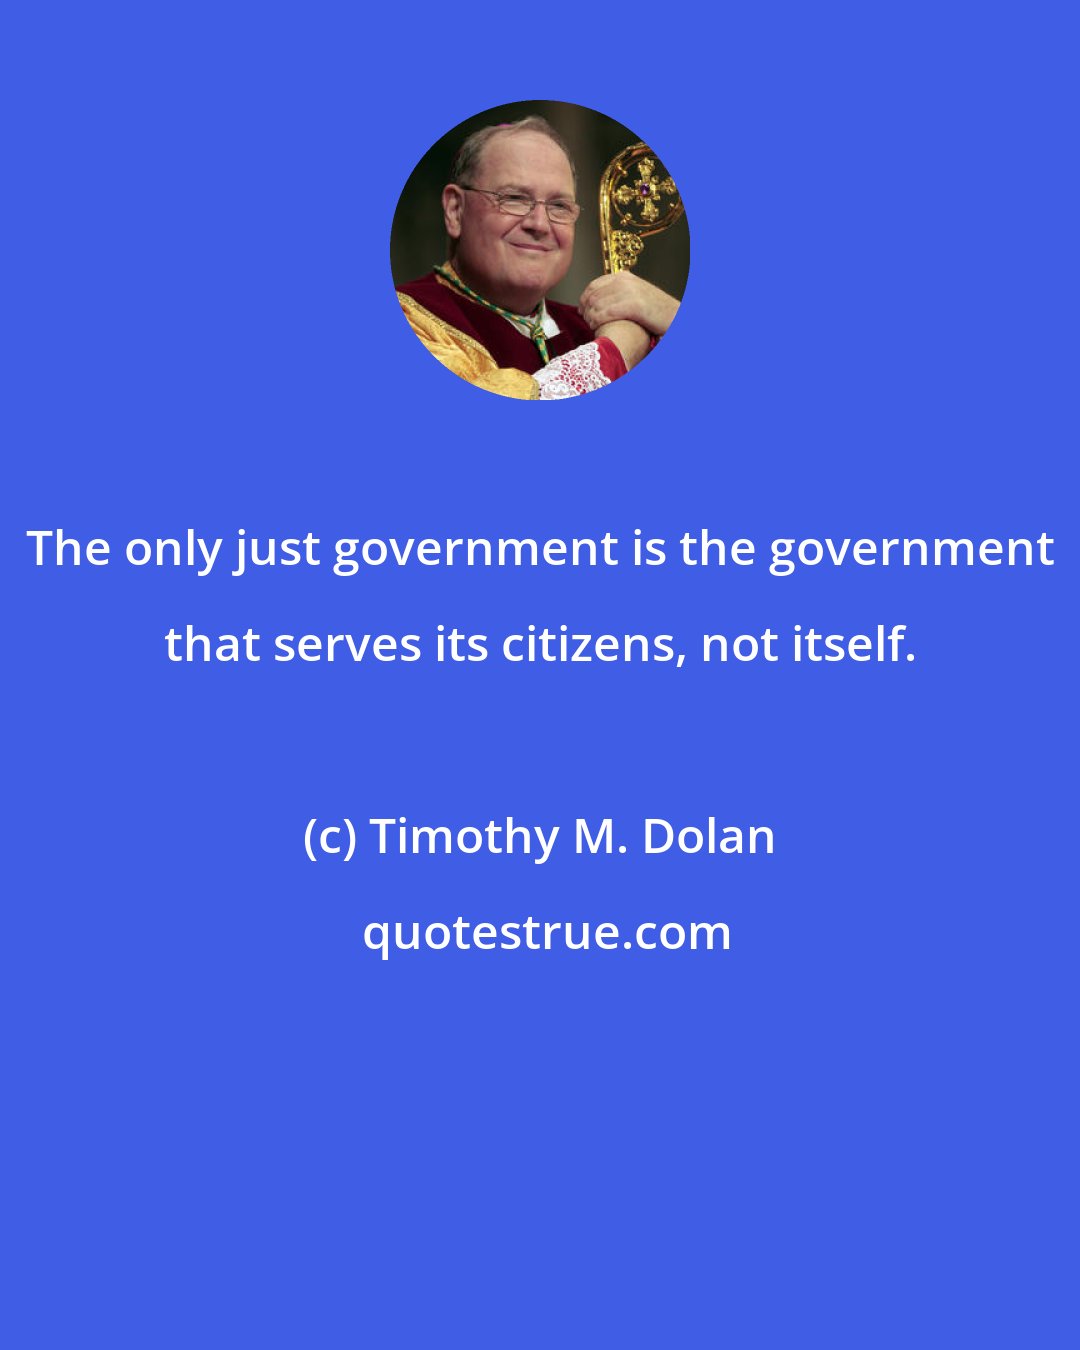 Timothy M. Dolan: The only just government is the government that serves its citizens, not itself.